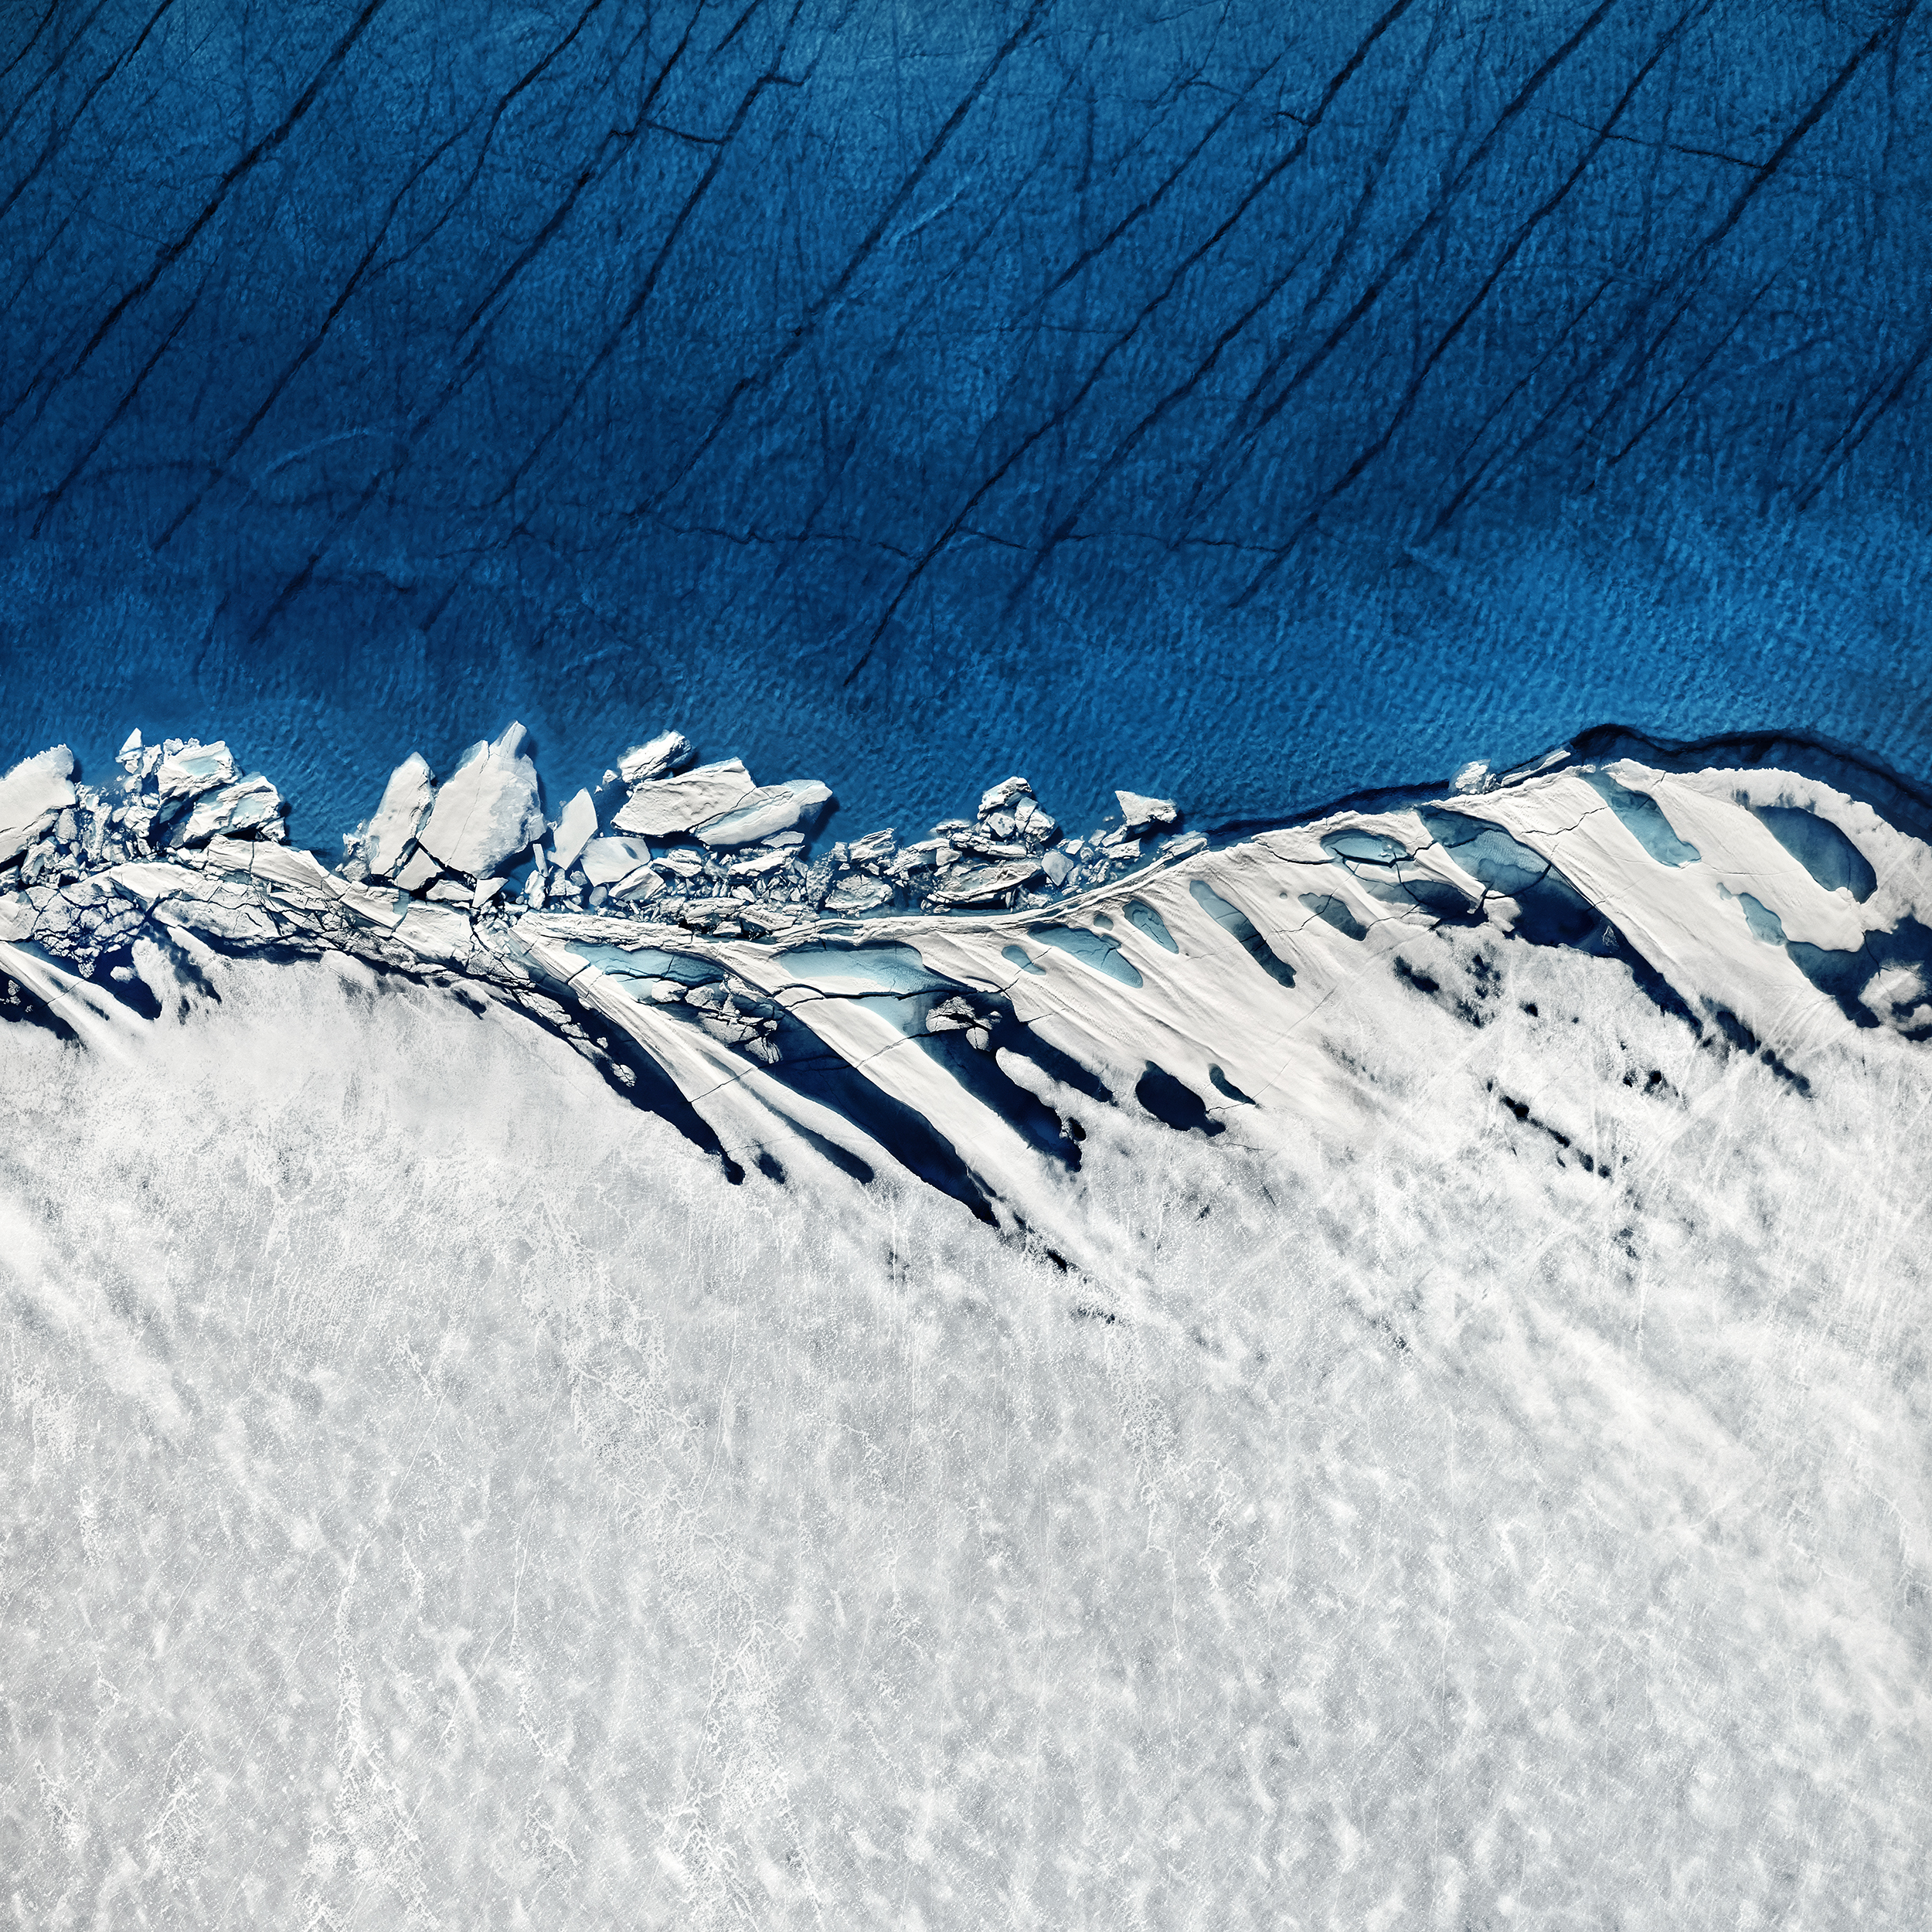 glaciers, Arctic, Iceberg, Snow, Ice, Water, Blue, Birds eye view, Aerial view, Melting Wallpaper